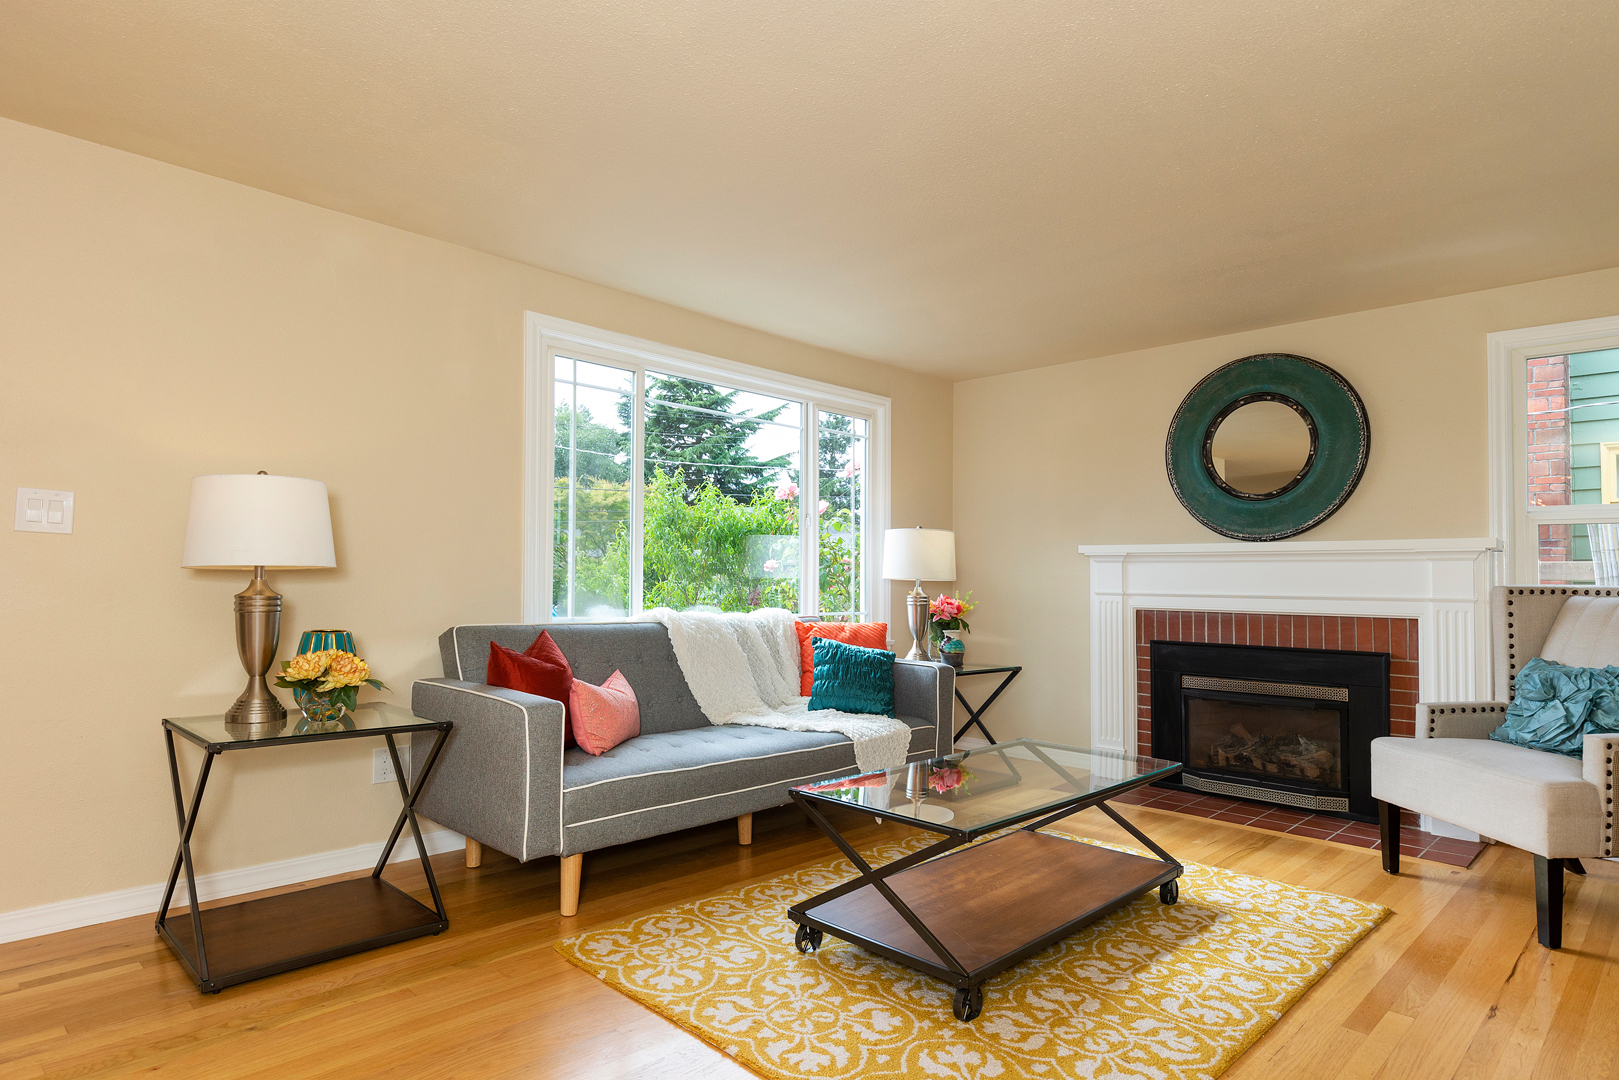 Property Photo: Living Room 7516 25th Ave NW  WA 98117 